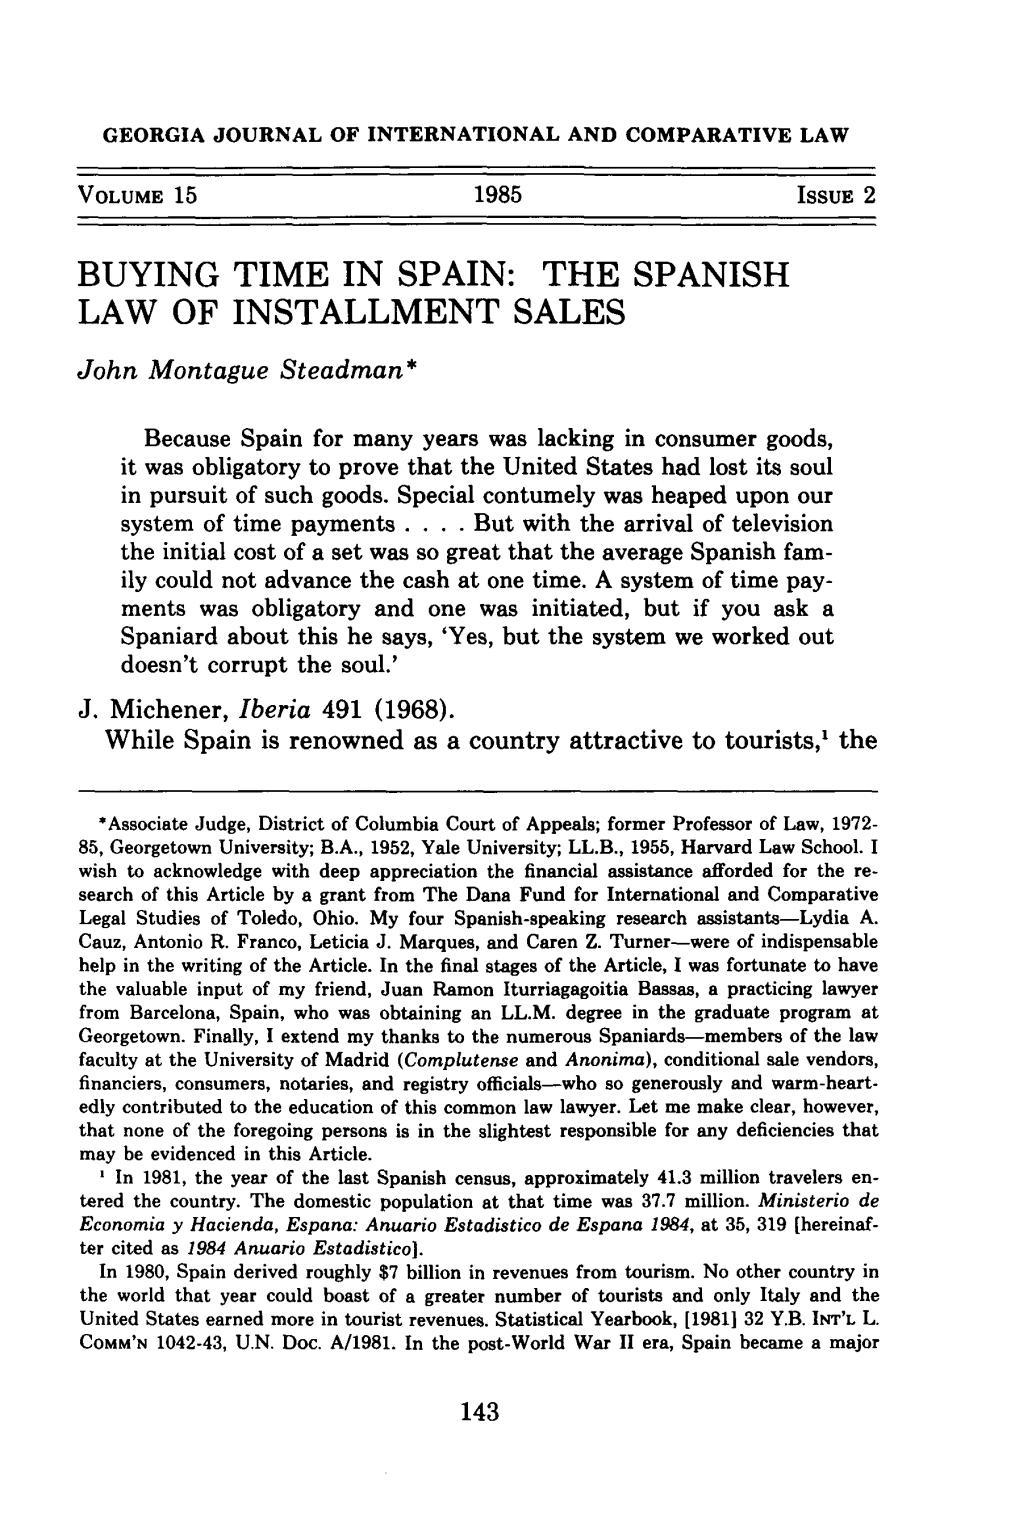 The Spanish Law of Installment Sales